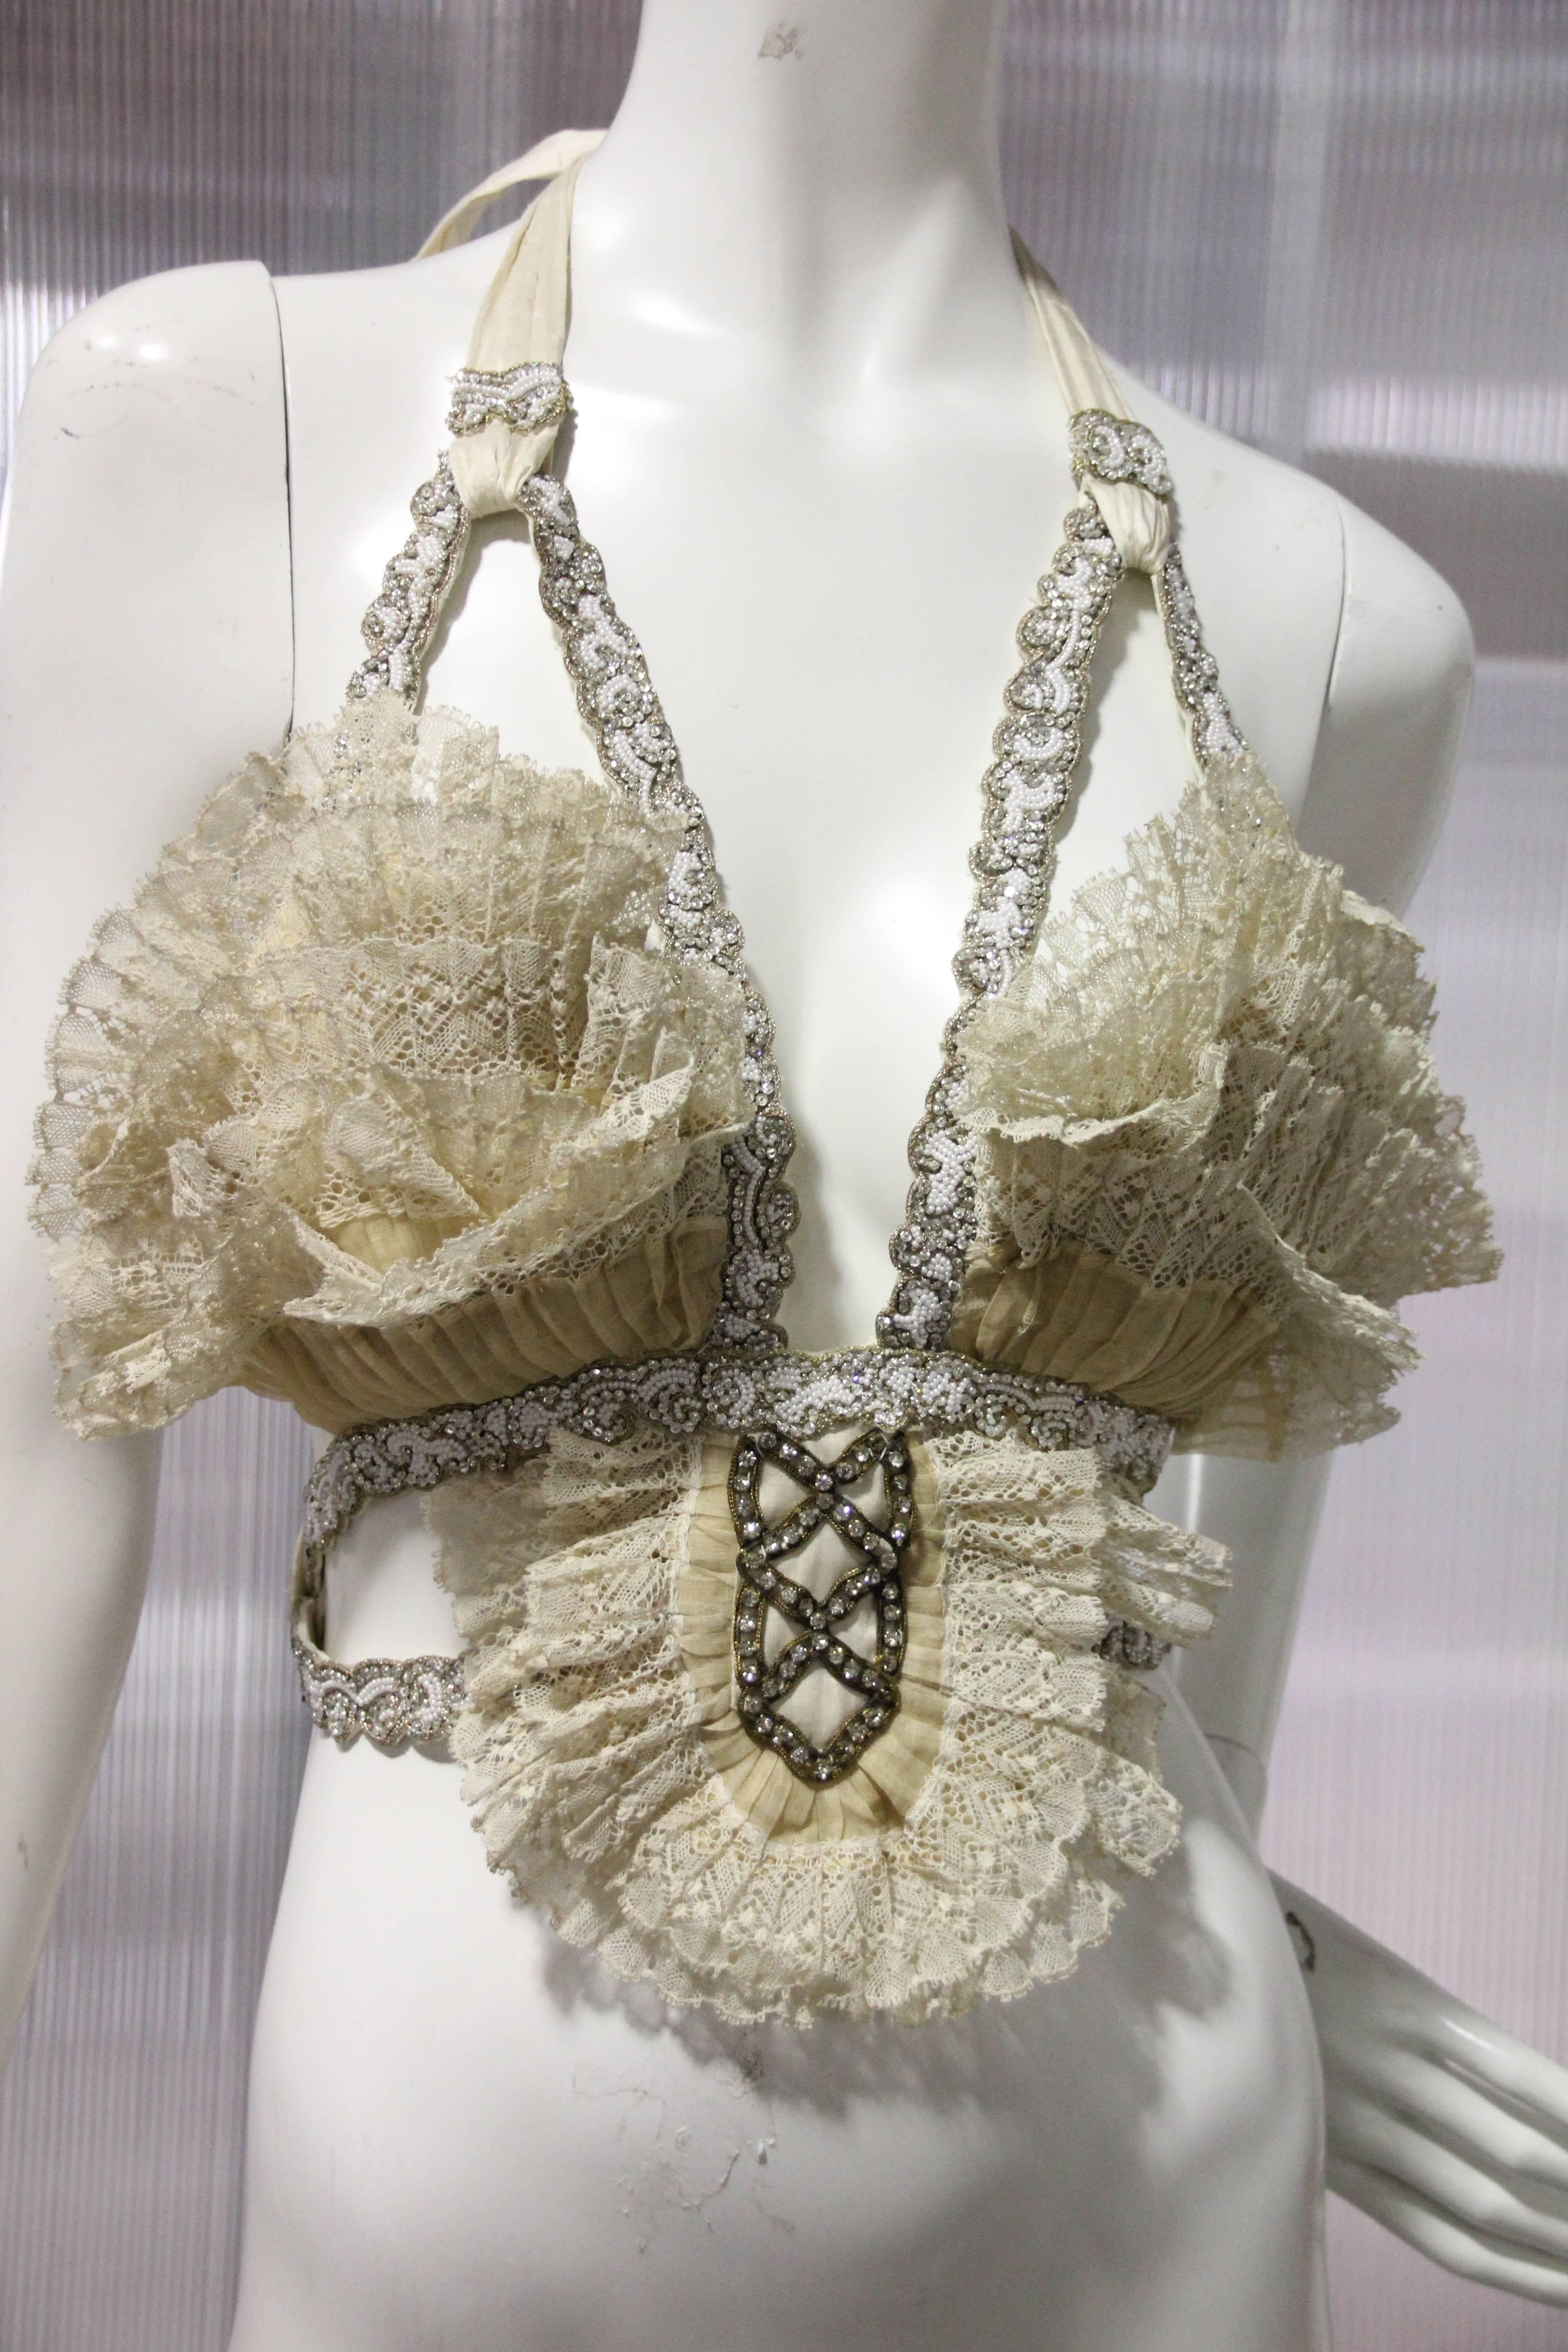 Abbreviated Victorian cream pleated lace bustier with silk ties at back. Silk lined.  Embellished with 1920s rhinestone lattice and modern crystal bead trim, backed with kid leather. 